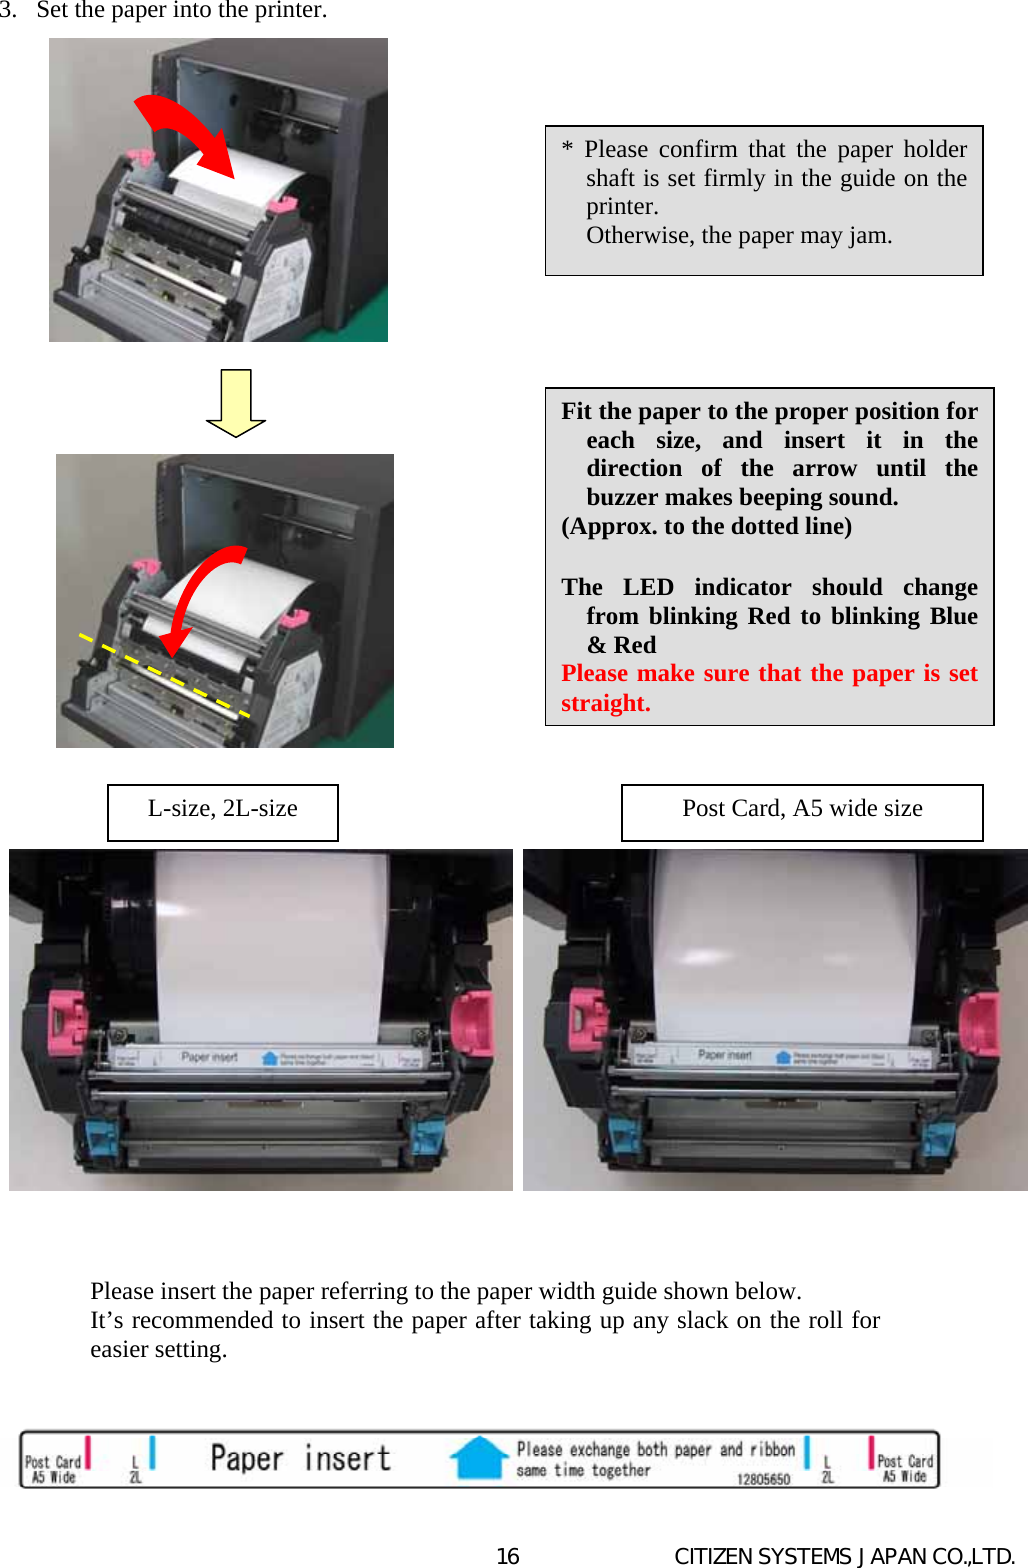   CITIZEN SYSTEMS JAPAN CO.,LTD. 163.  Set the paper into the printer.                                                      L-size, 2L-size  Post Card, A5 wide size * Please confirm that the paper holdershaft is set firmly in the guide on theprinter.     Otherwise, the paper may jam.   Fit the paper to the proper position for each size, and insert it in the direction of the arrow until the buzzer makes beeping sound. (Approx. to the dotted line)  The LED indicator should change from blinking Red to blinking Blue &amp; Red Please make sure that the paper is set straight. Please insert the paper referring to the paper width guide shown below.  It’s recommended to insert the paper after taking up any slack on the roll foreasier setting.  